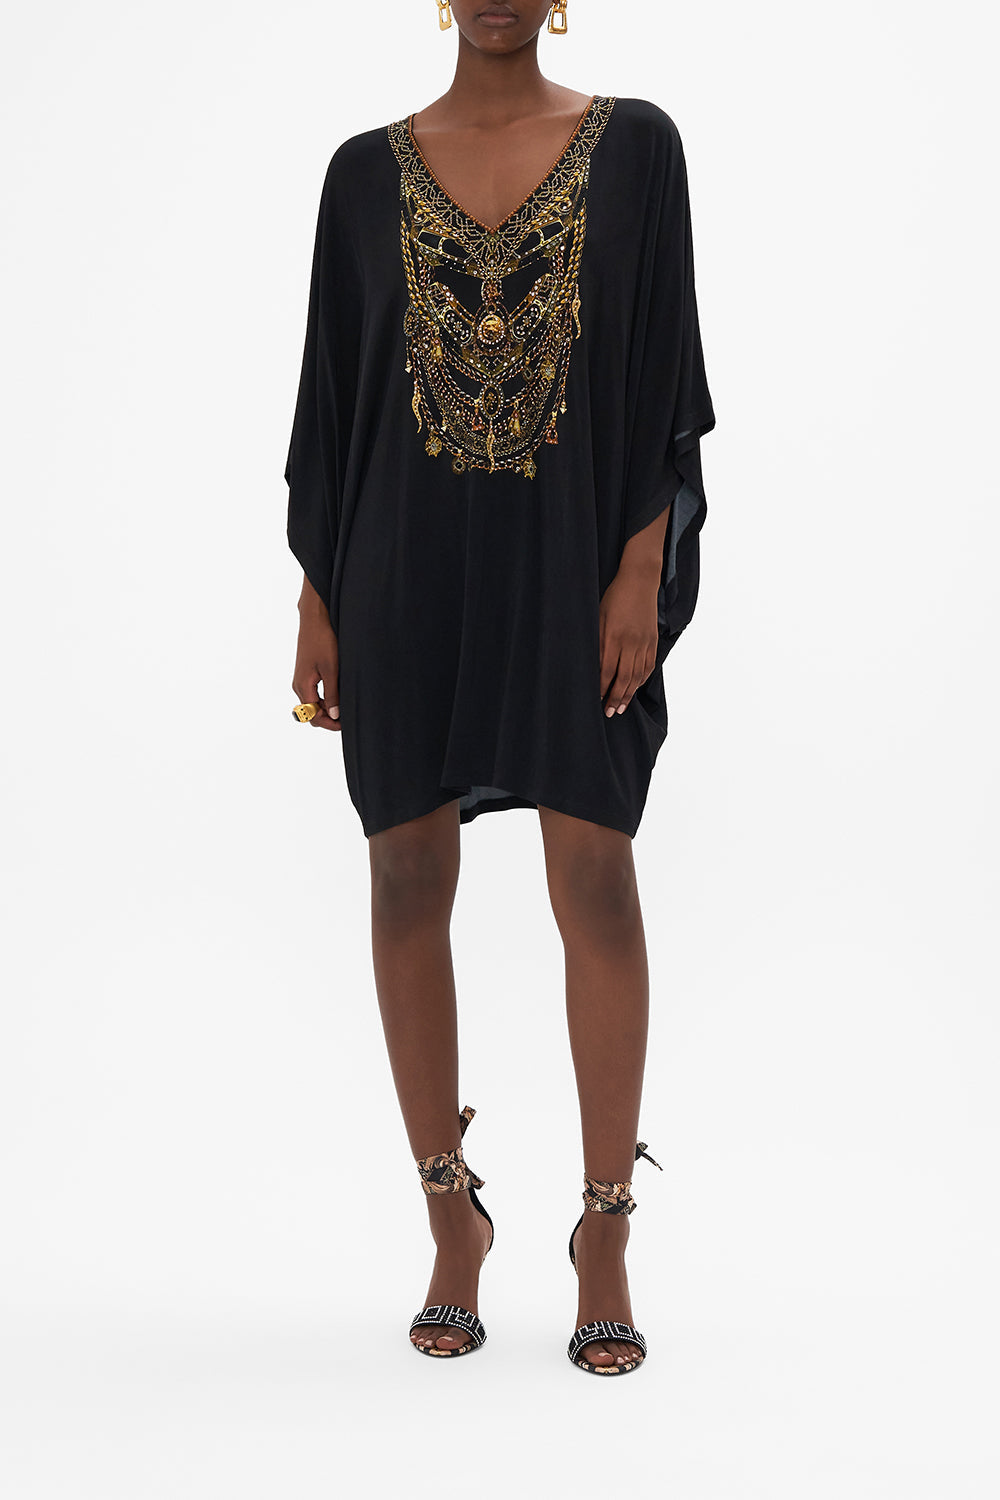 Front view of model wearing CAMILLA black batwing dress in Look Up Tesoro